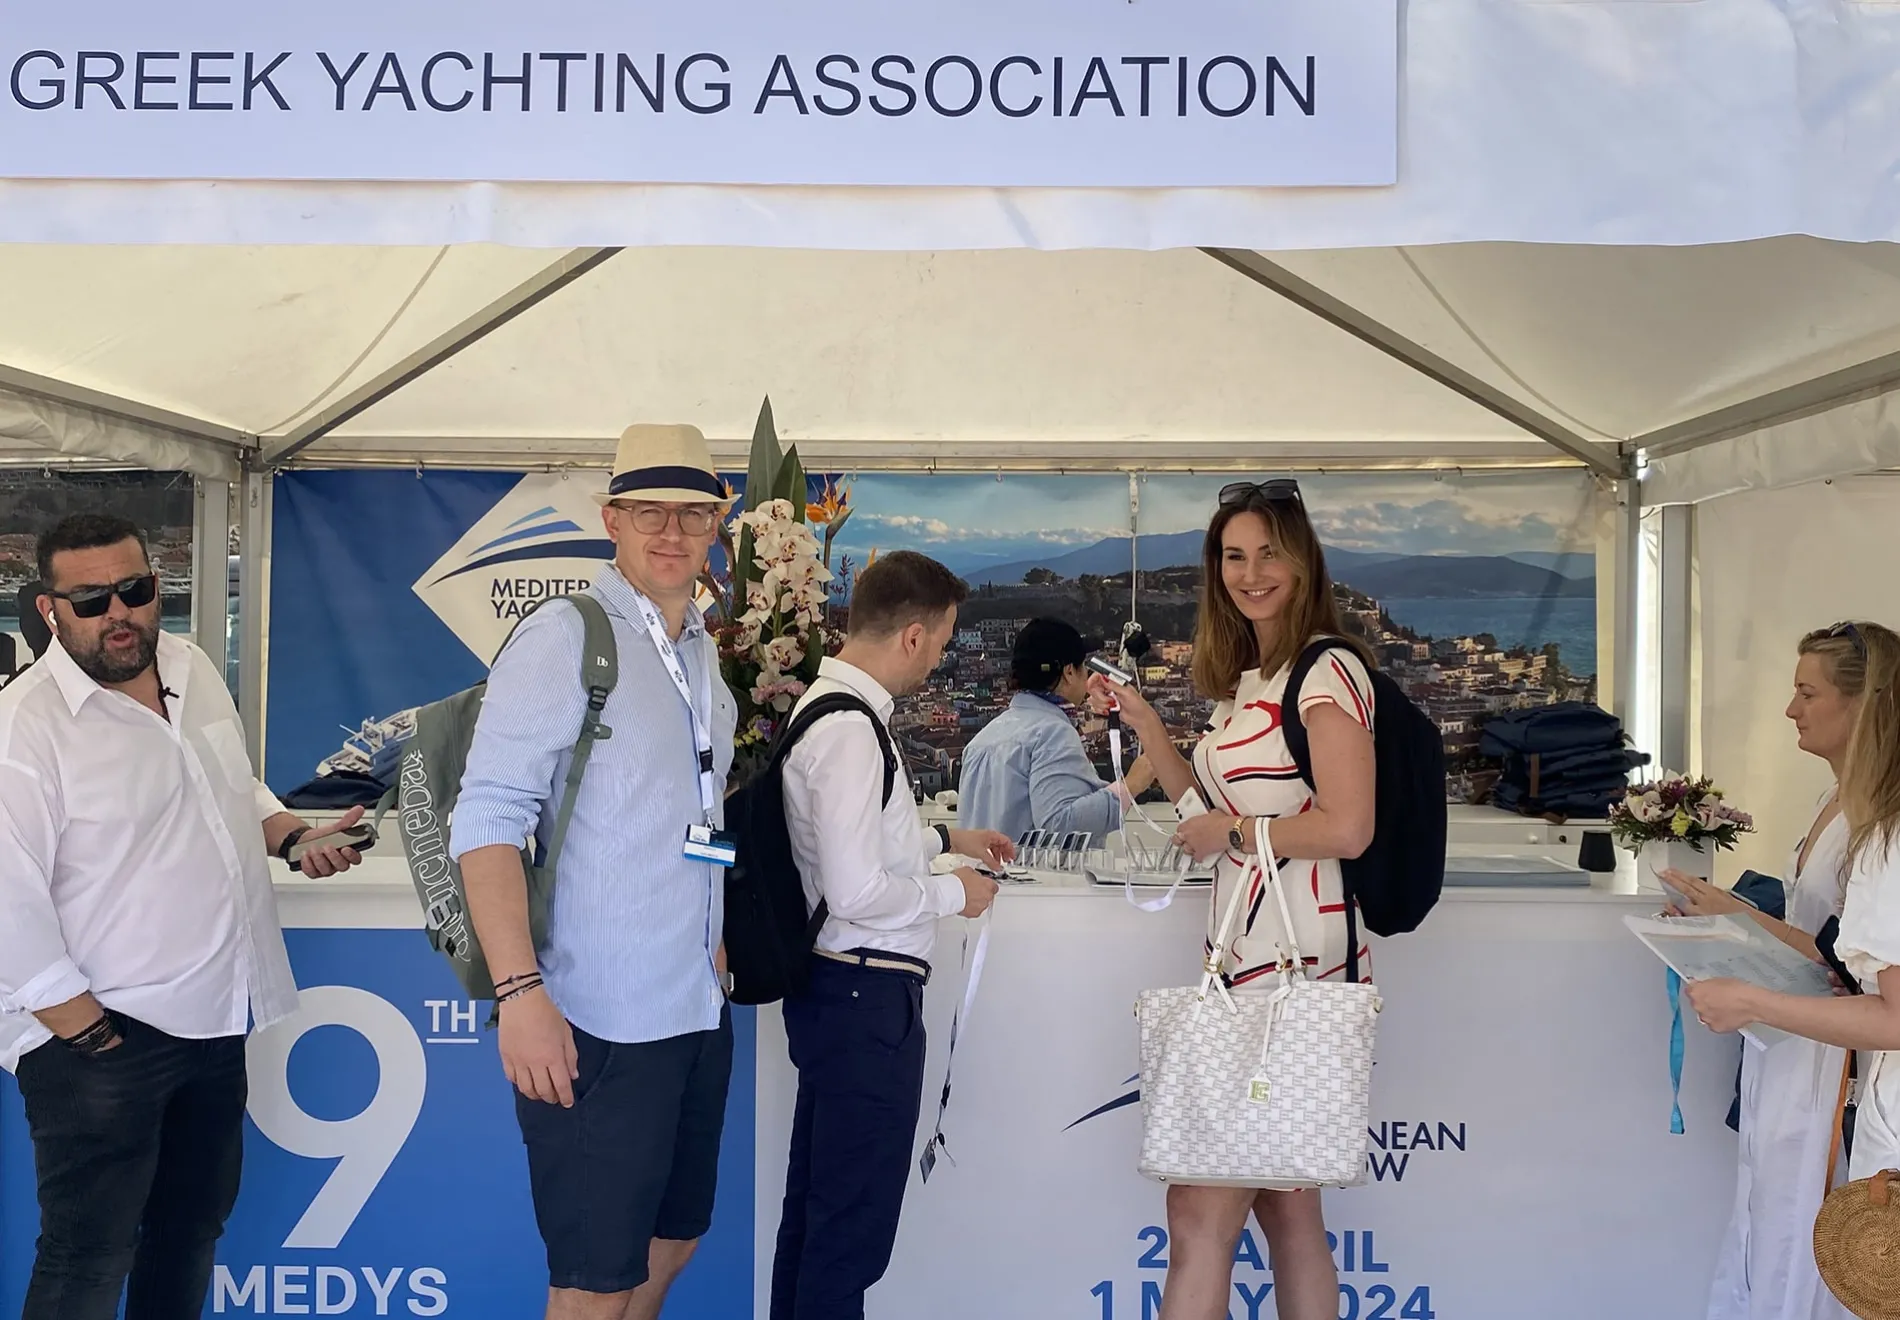 But MEDYS was more than just a showcase of luxurious vessels; it was a unique platform where yacht owners and brokers conver